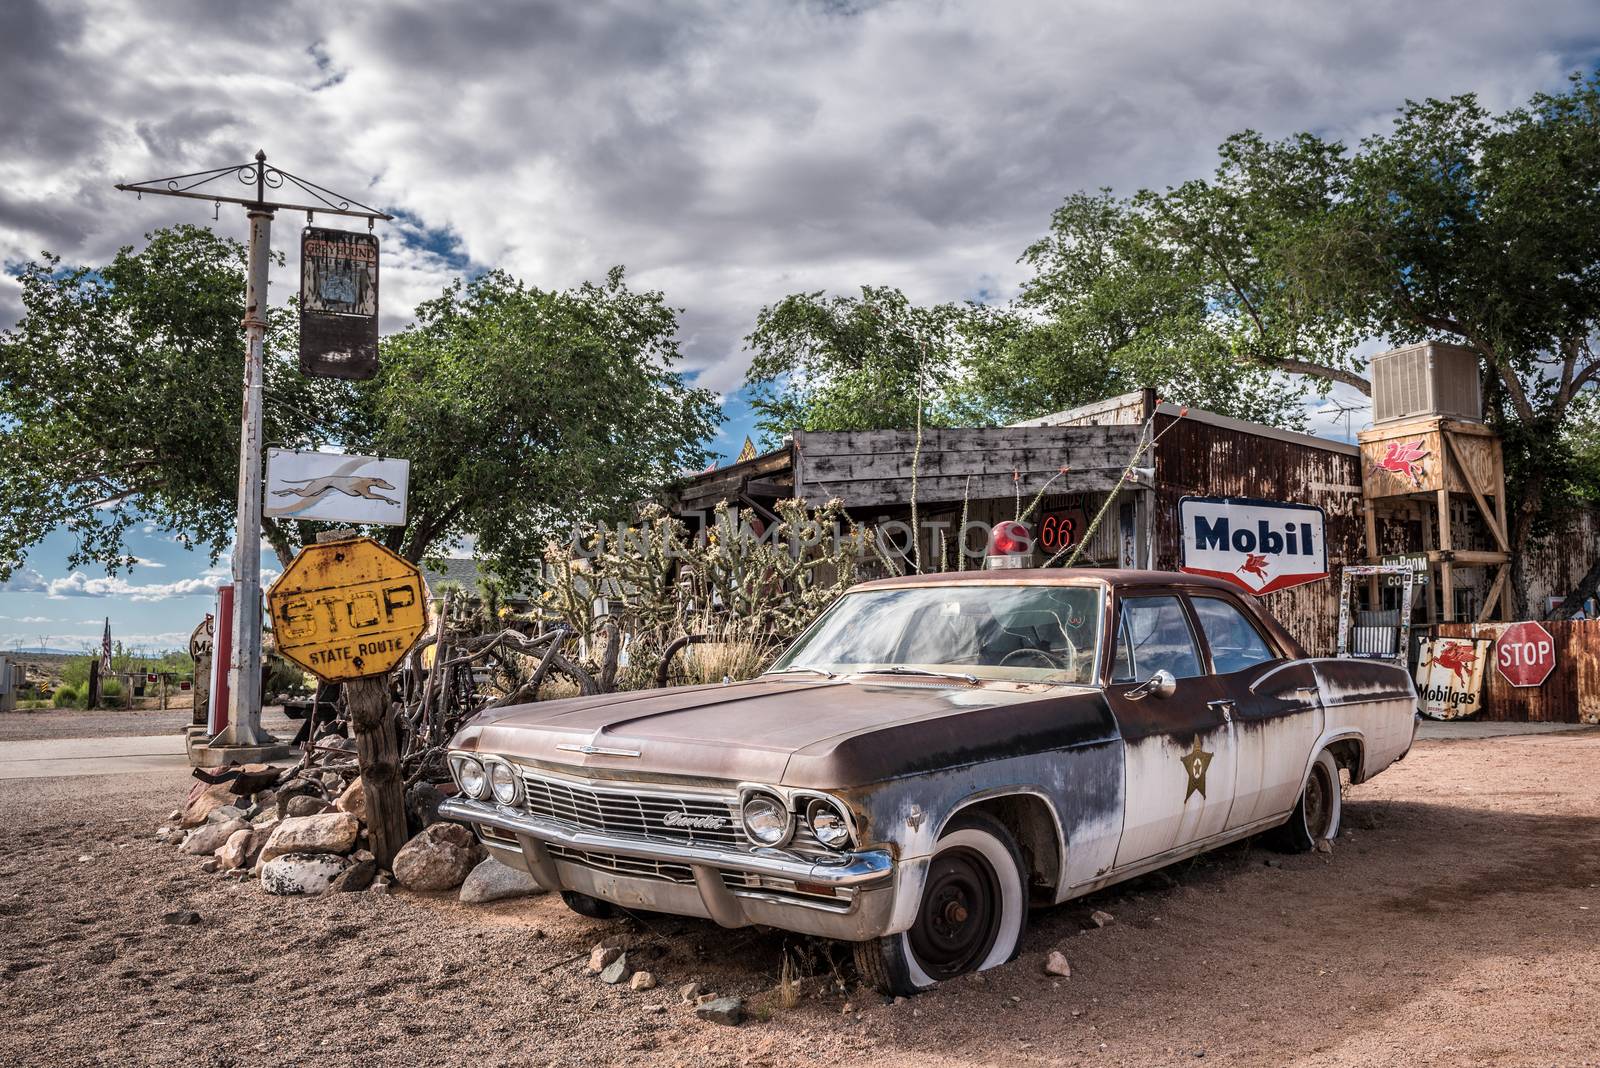 HACKBERRY, ARIZONA, USA - MAY 19, 2016 : Old sheriff's car wreck with a siren left abandoned near the Hackberry General Store. Hackberry General Store is a famous stop on the historic Route 66.